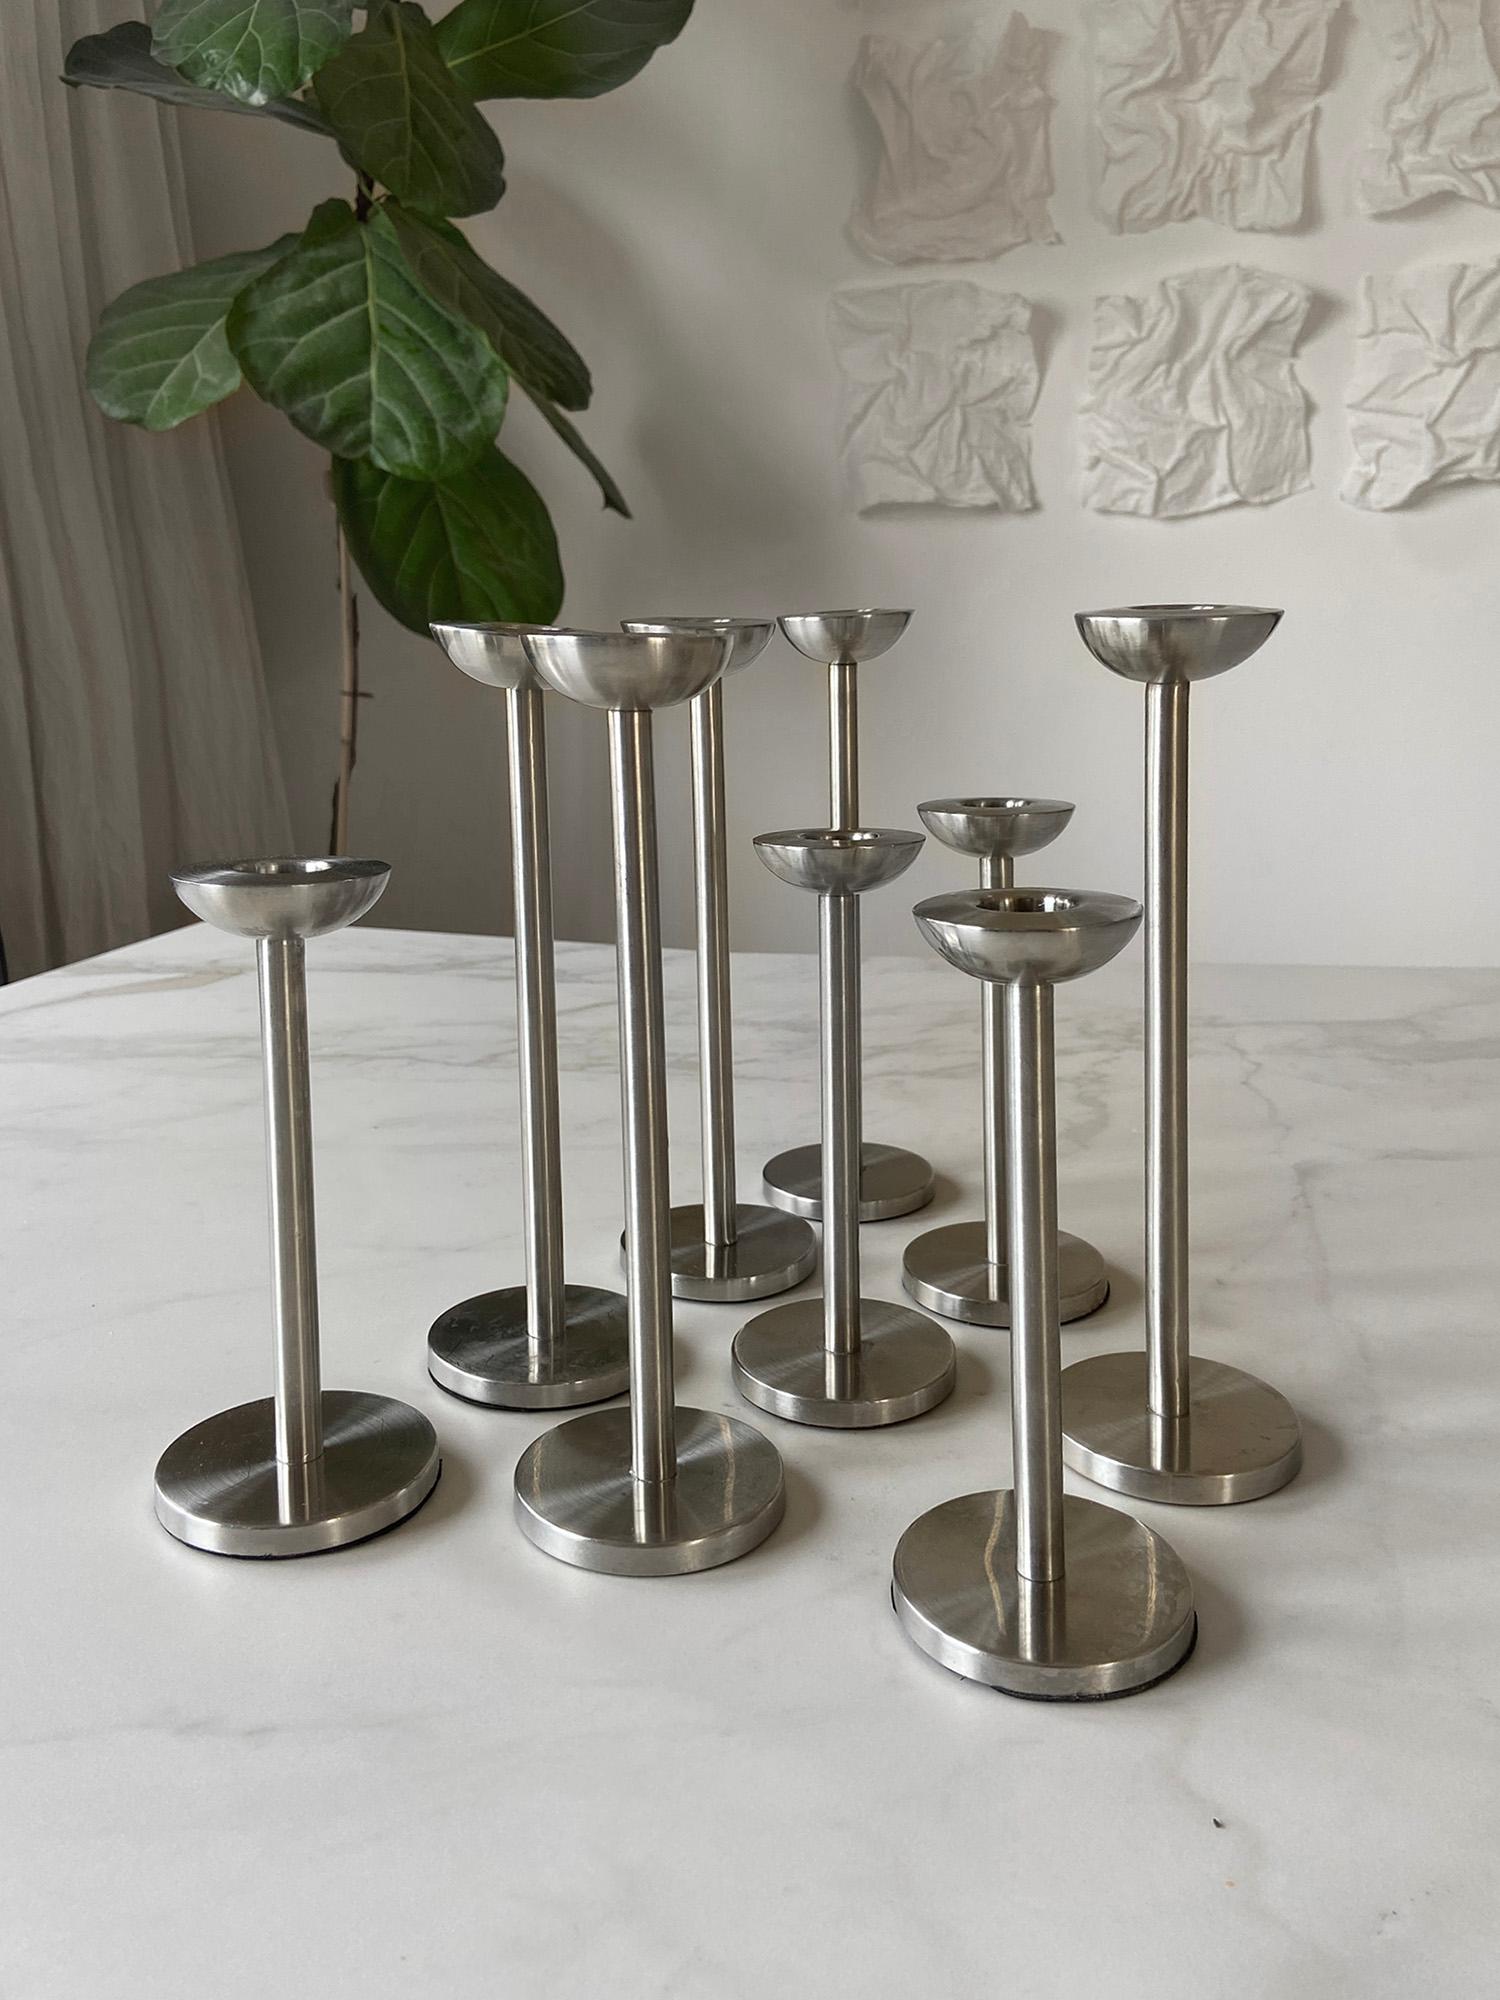 German Stainless Steel Minimalist Design Candle Holder set of 9 For Sale 9